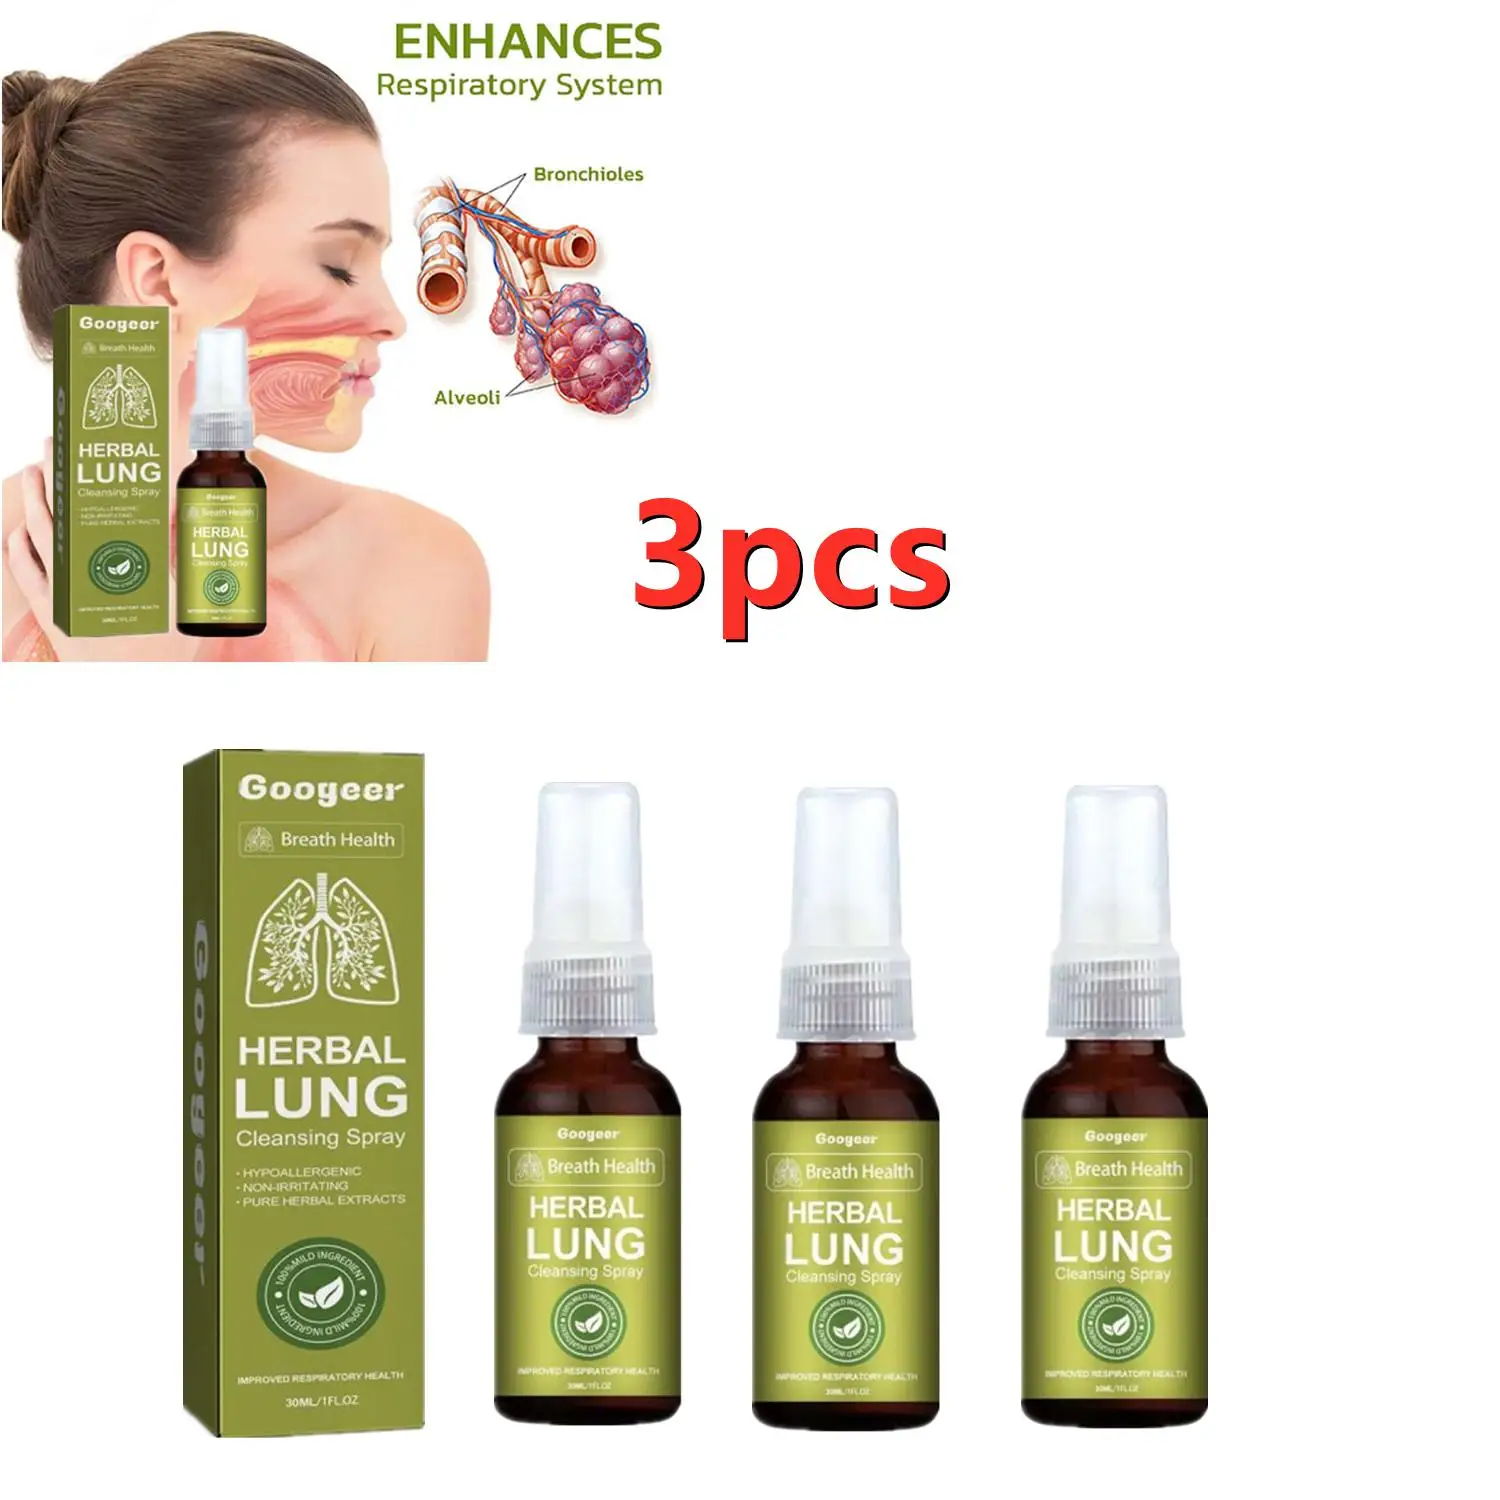 

3X Googeer Herbal Lung Cleansing Spray Breath Detox Herbal Lung Cleanse Spray, Herbal Lung Cleanse Mist - Powerful Lung Support